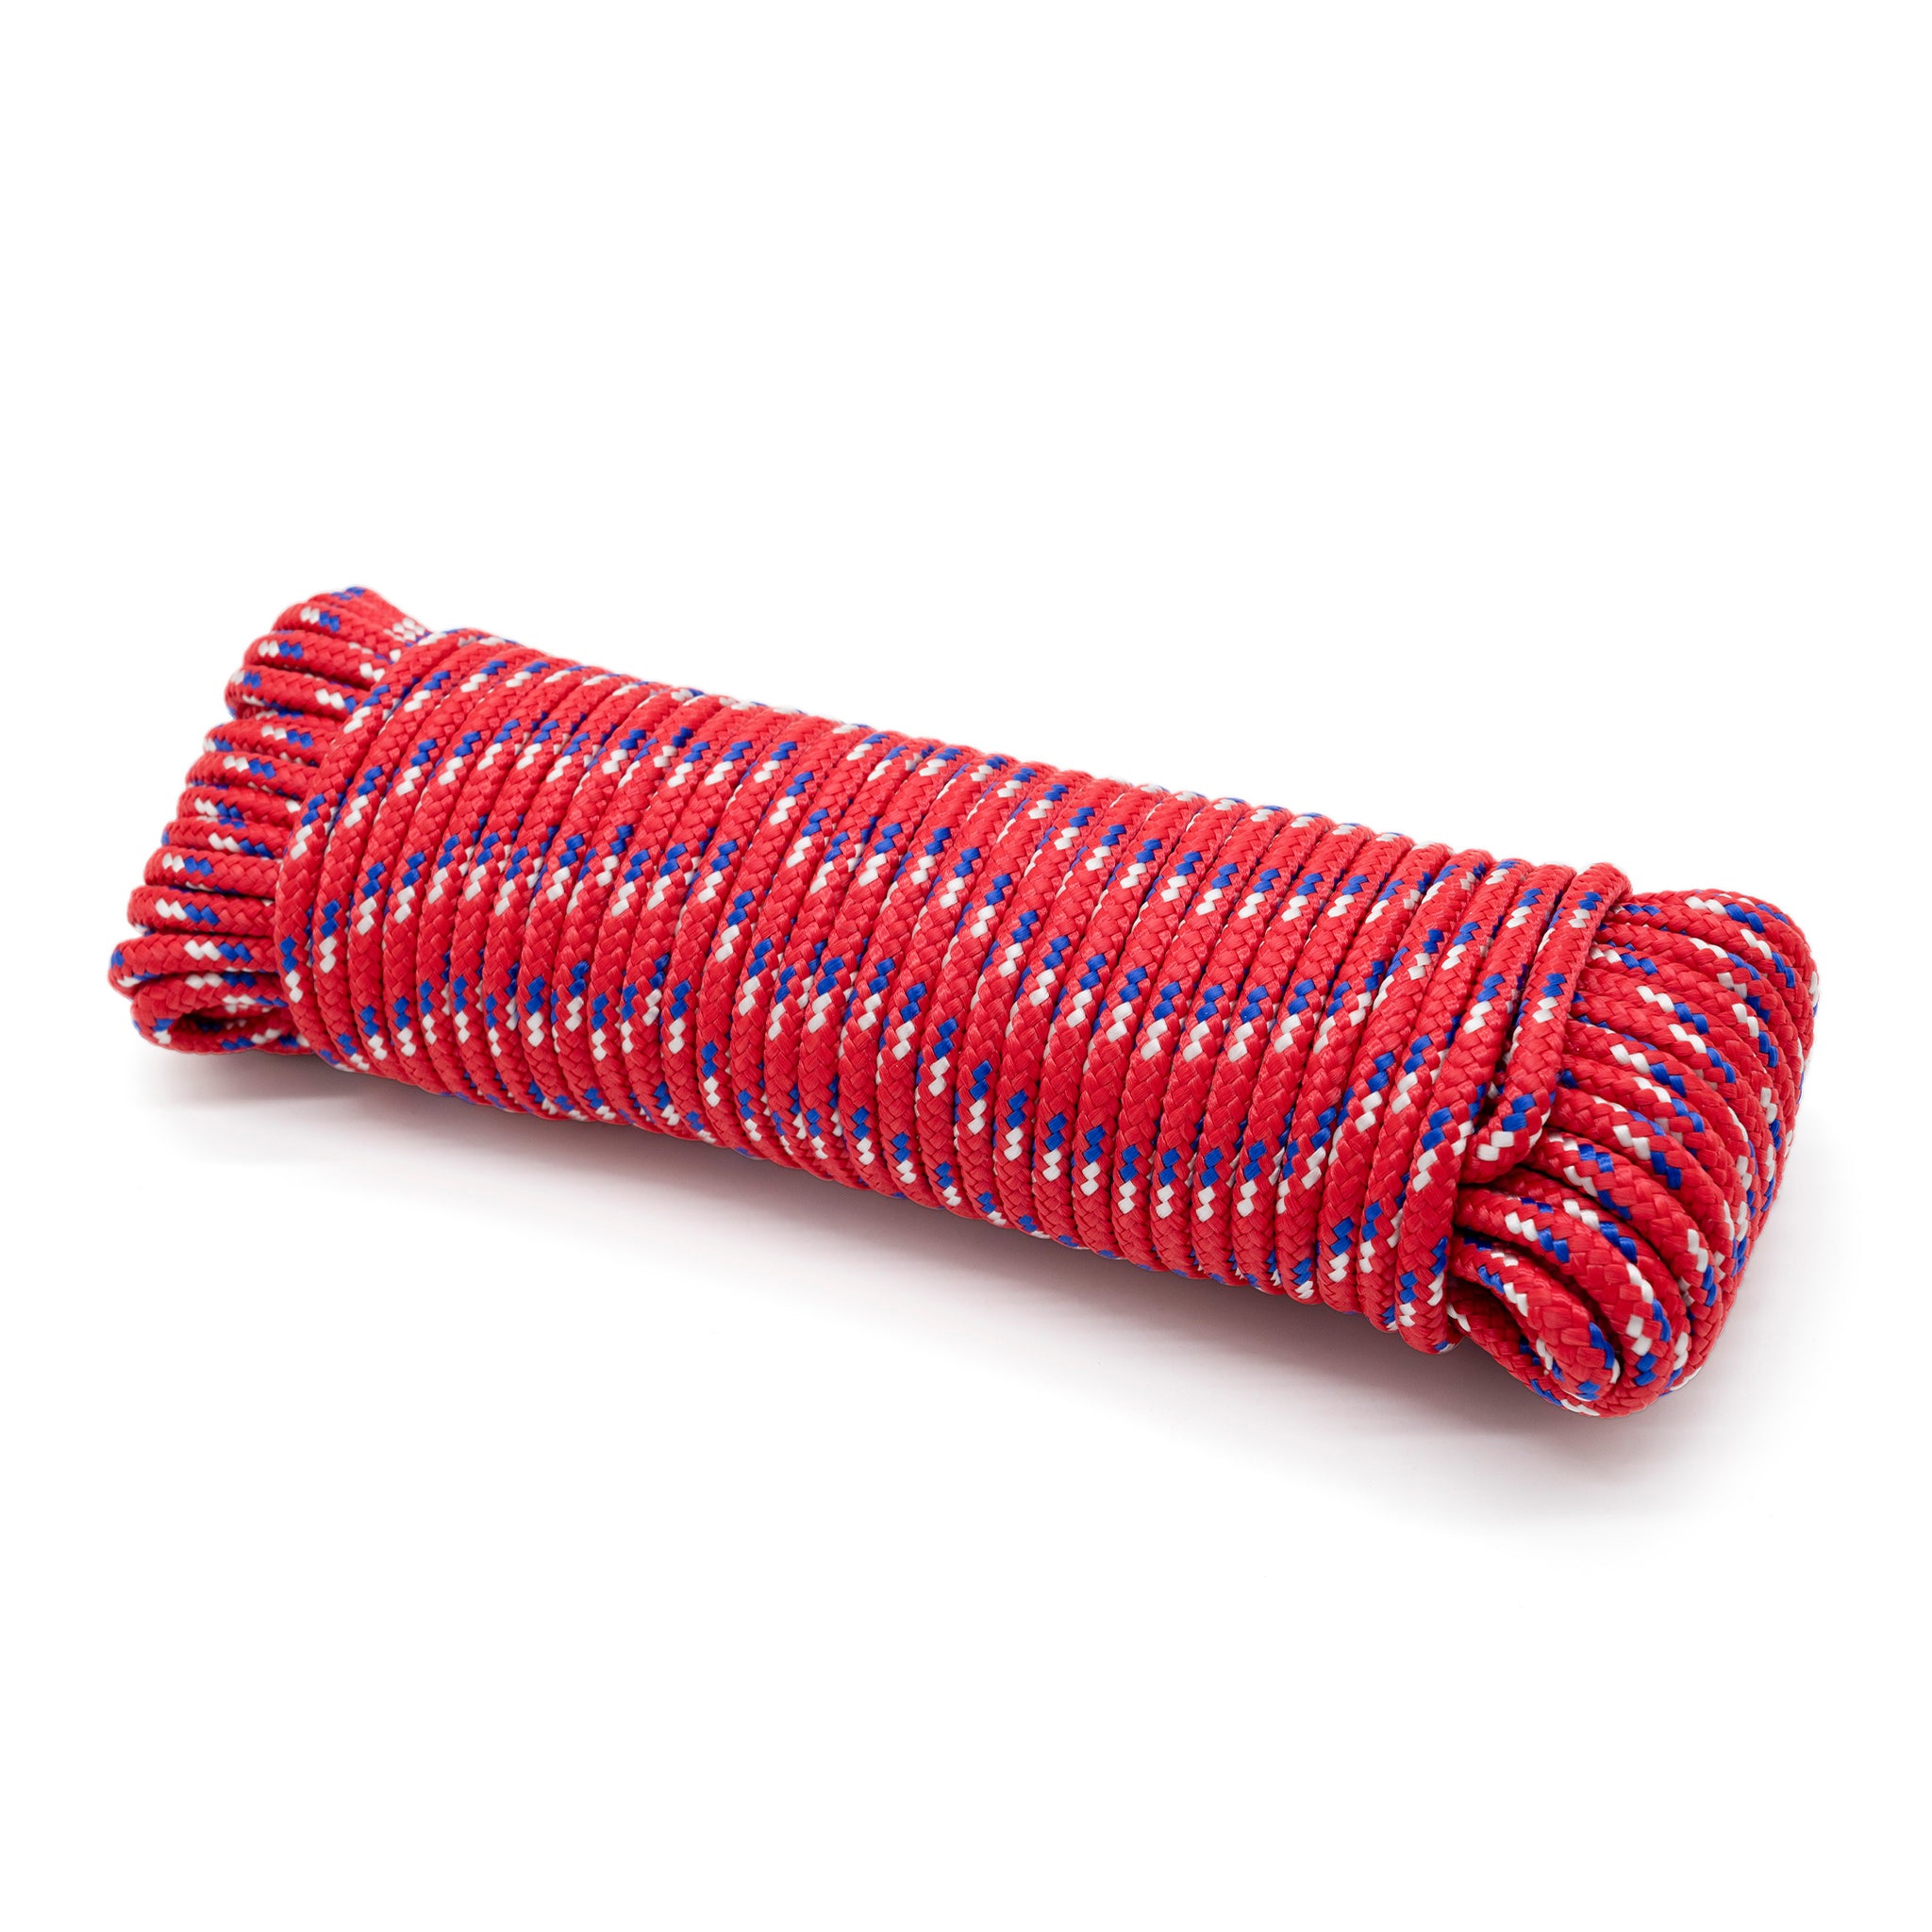 Utility Rope 6mm x 25m Bundle - Red